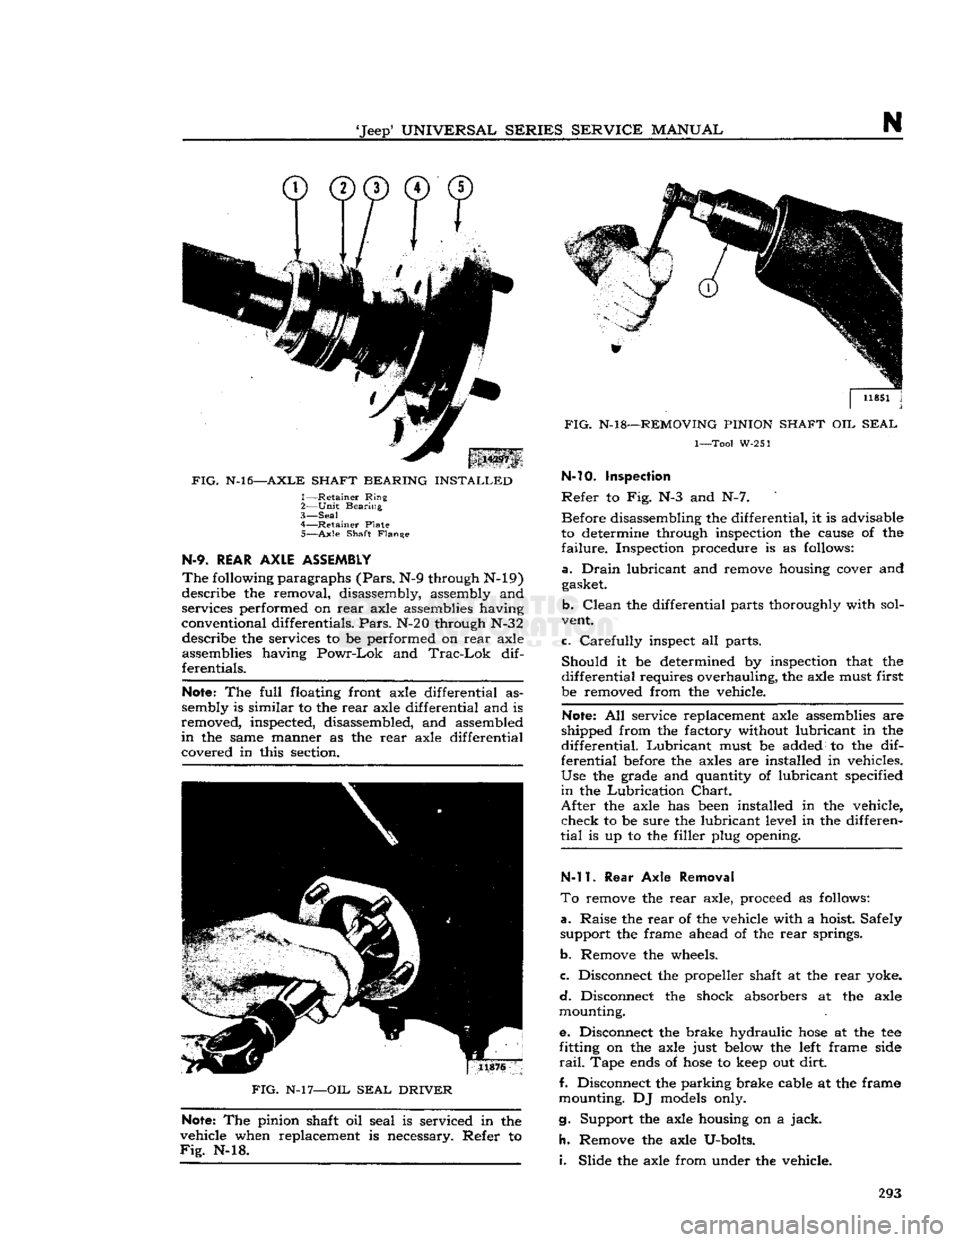 JEEP CJ 1953 User Guide 
Jeep*
 UNIVERSAL
 SERIES
 SERVICE
 MANUAL 

N 

FIG.
 N-l6—AXLE
 SHAFT
 BEARING
 INSTALLED 
 1—
 Retainer
 Ring 

2—
 Unit
 Bearing 

3—
 Seal 

4—
 Retainer
 Plate 
 5—
 Axle
 Shaft
 Fl